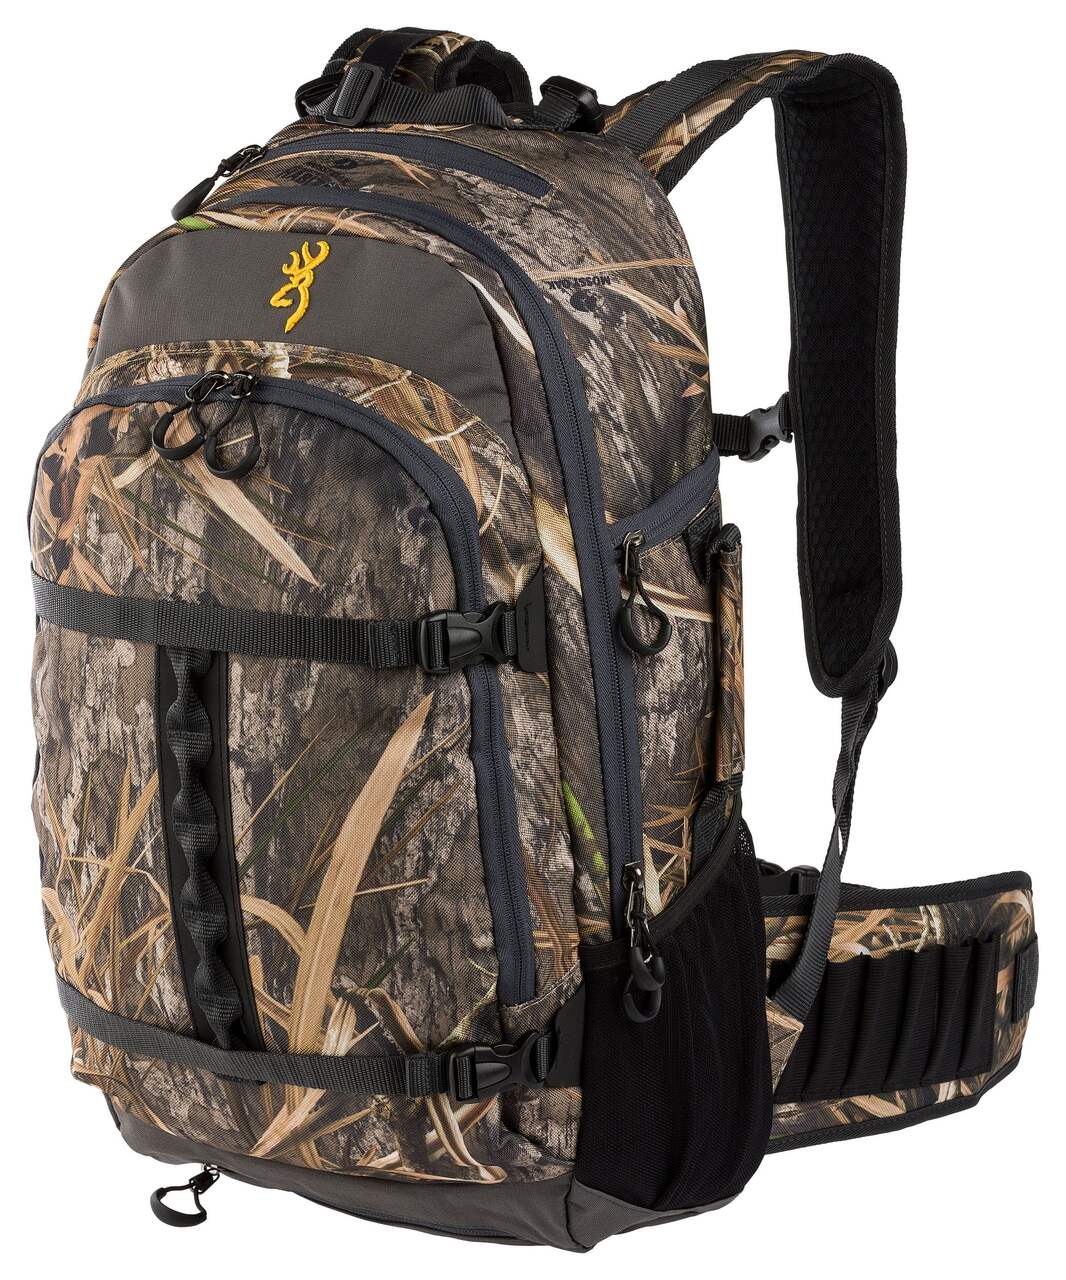 Sac à dos de chasse Browning Wicked Wing<sup>MC</sup>, Mossy Oak MOSGH, 12  x 7 x 20 po